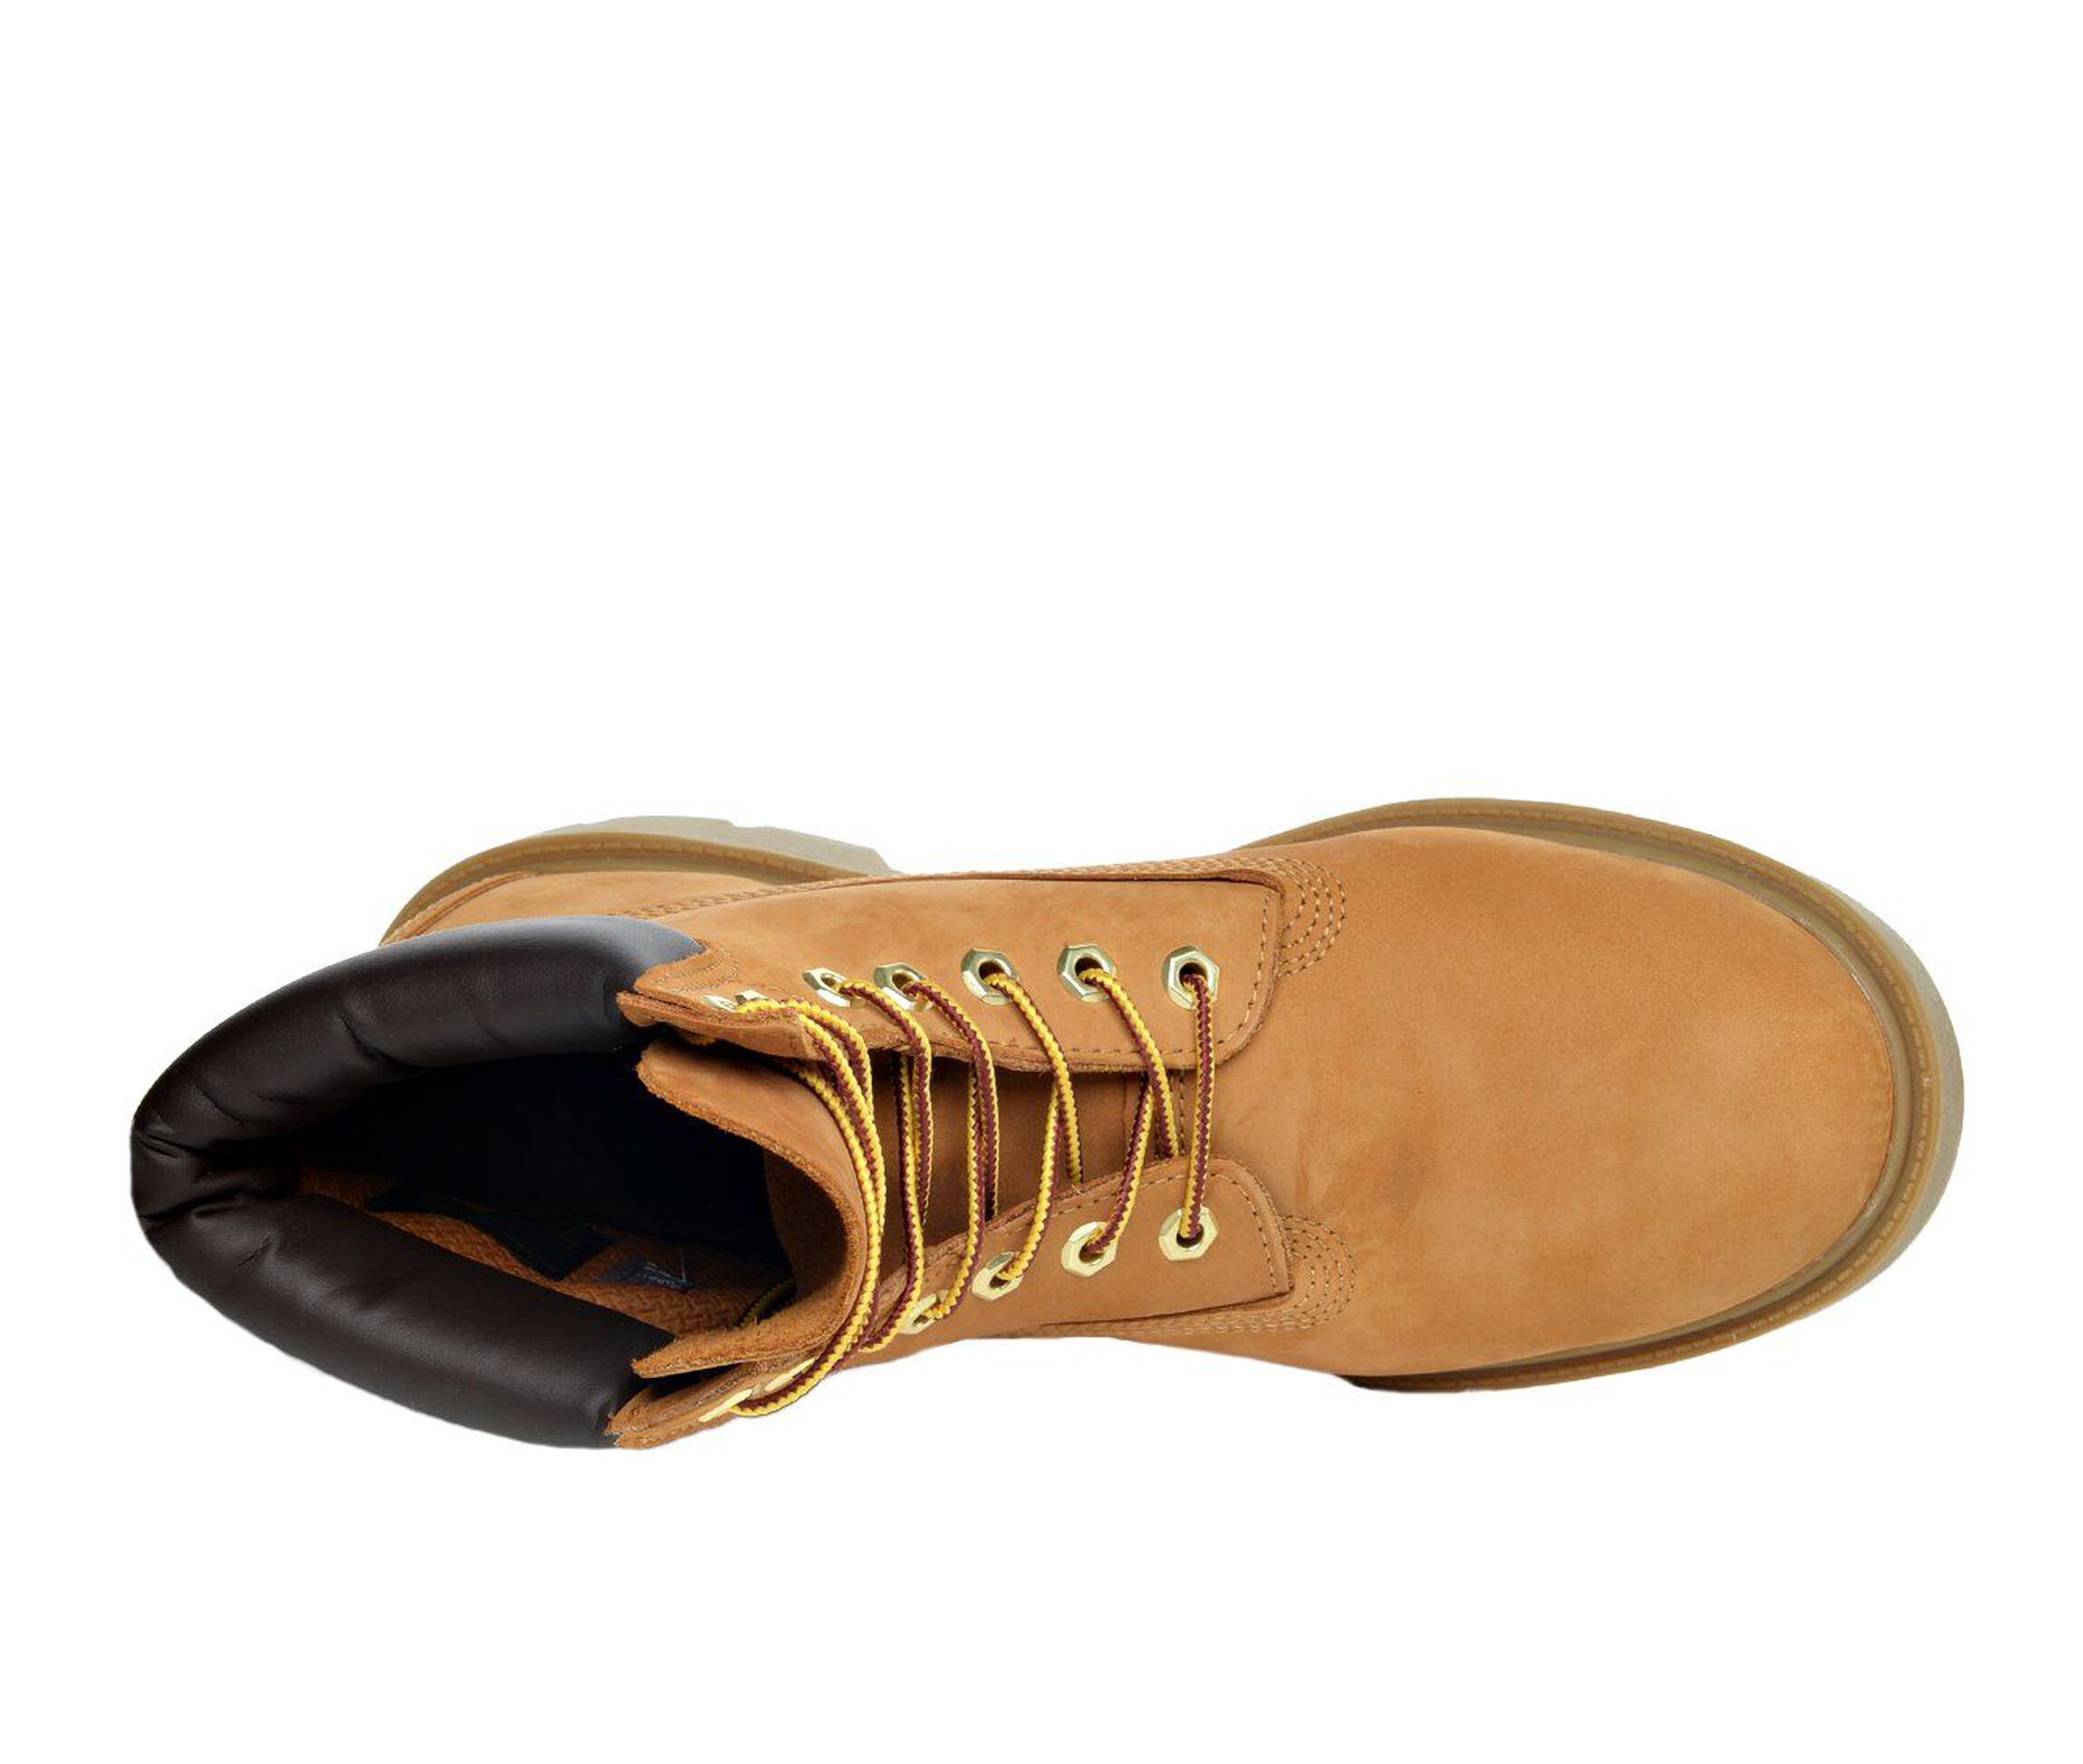 Timberland Boots & Shoes | Shoe Carnival